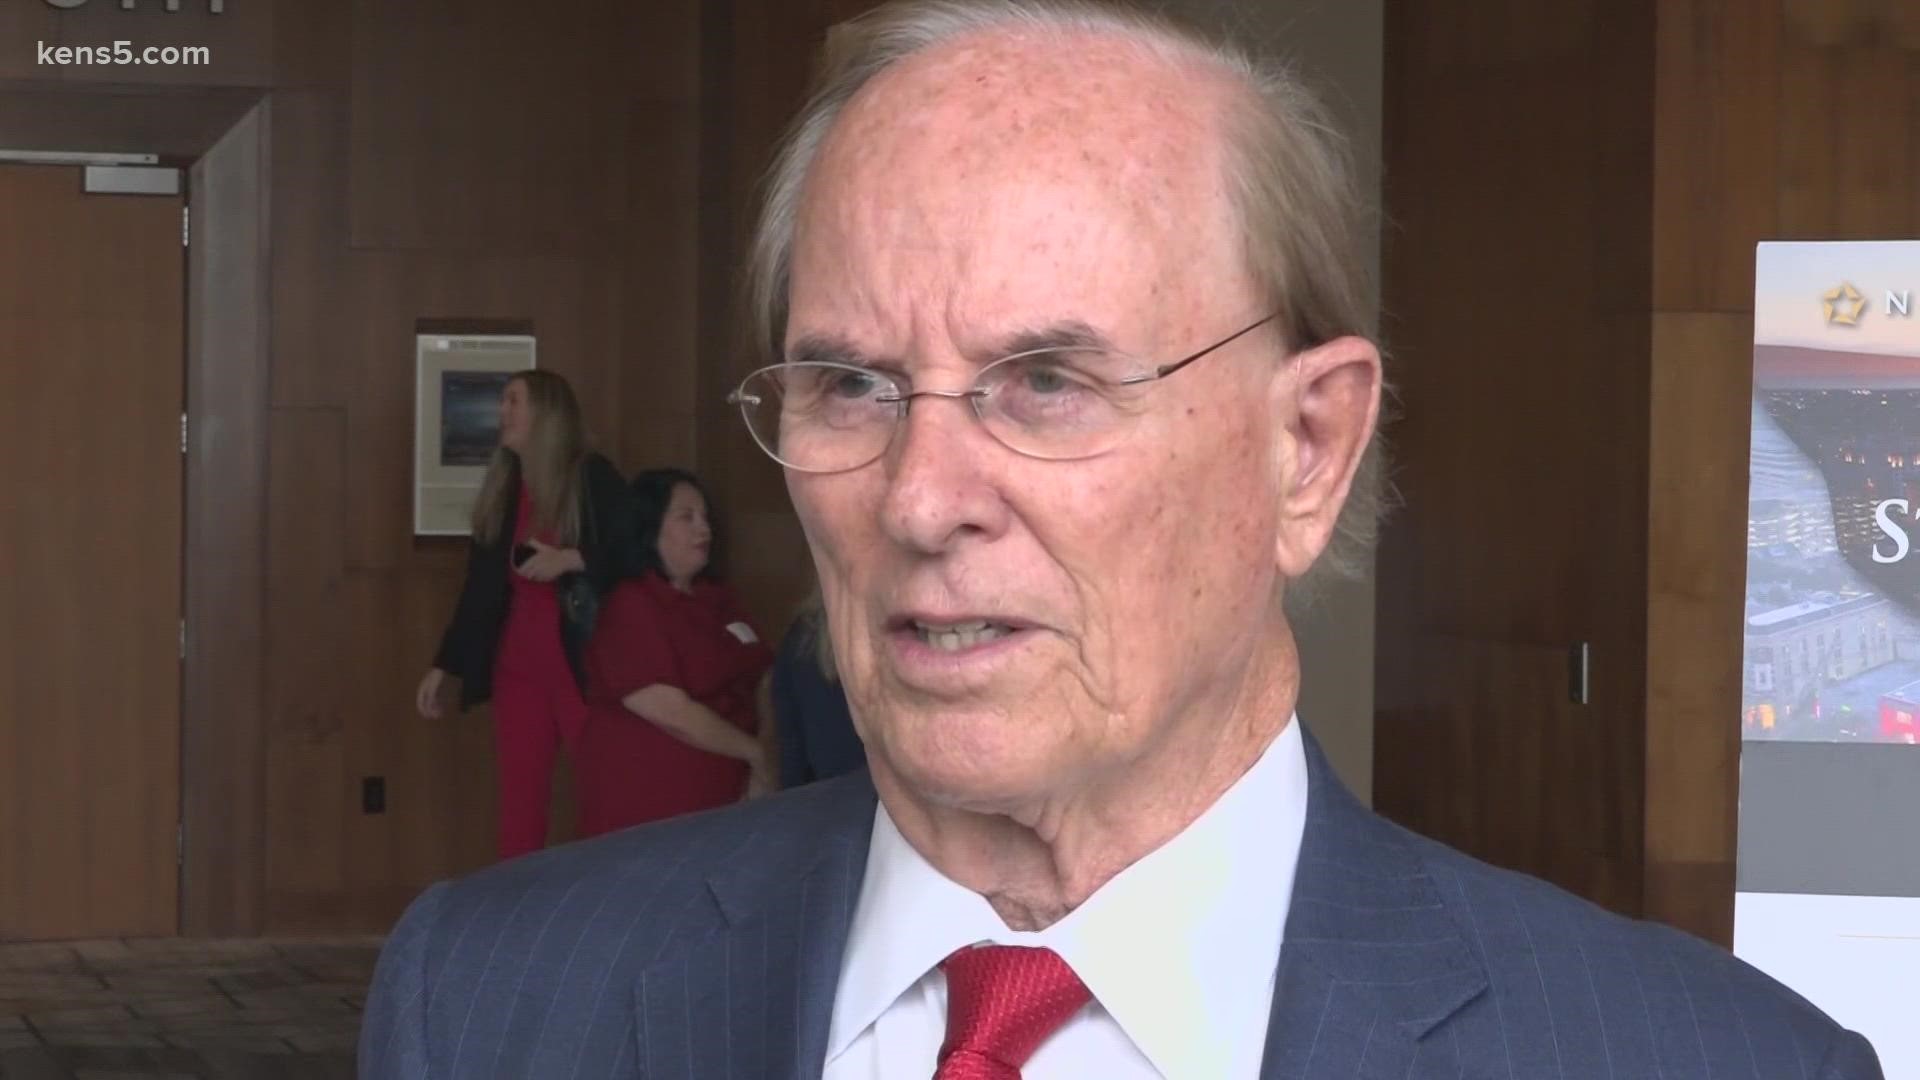 Judge Wolff reflected on his 20-year career in the seat along with the challenges.